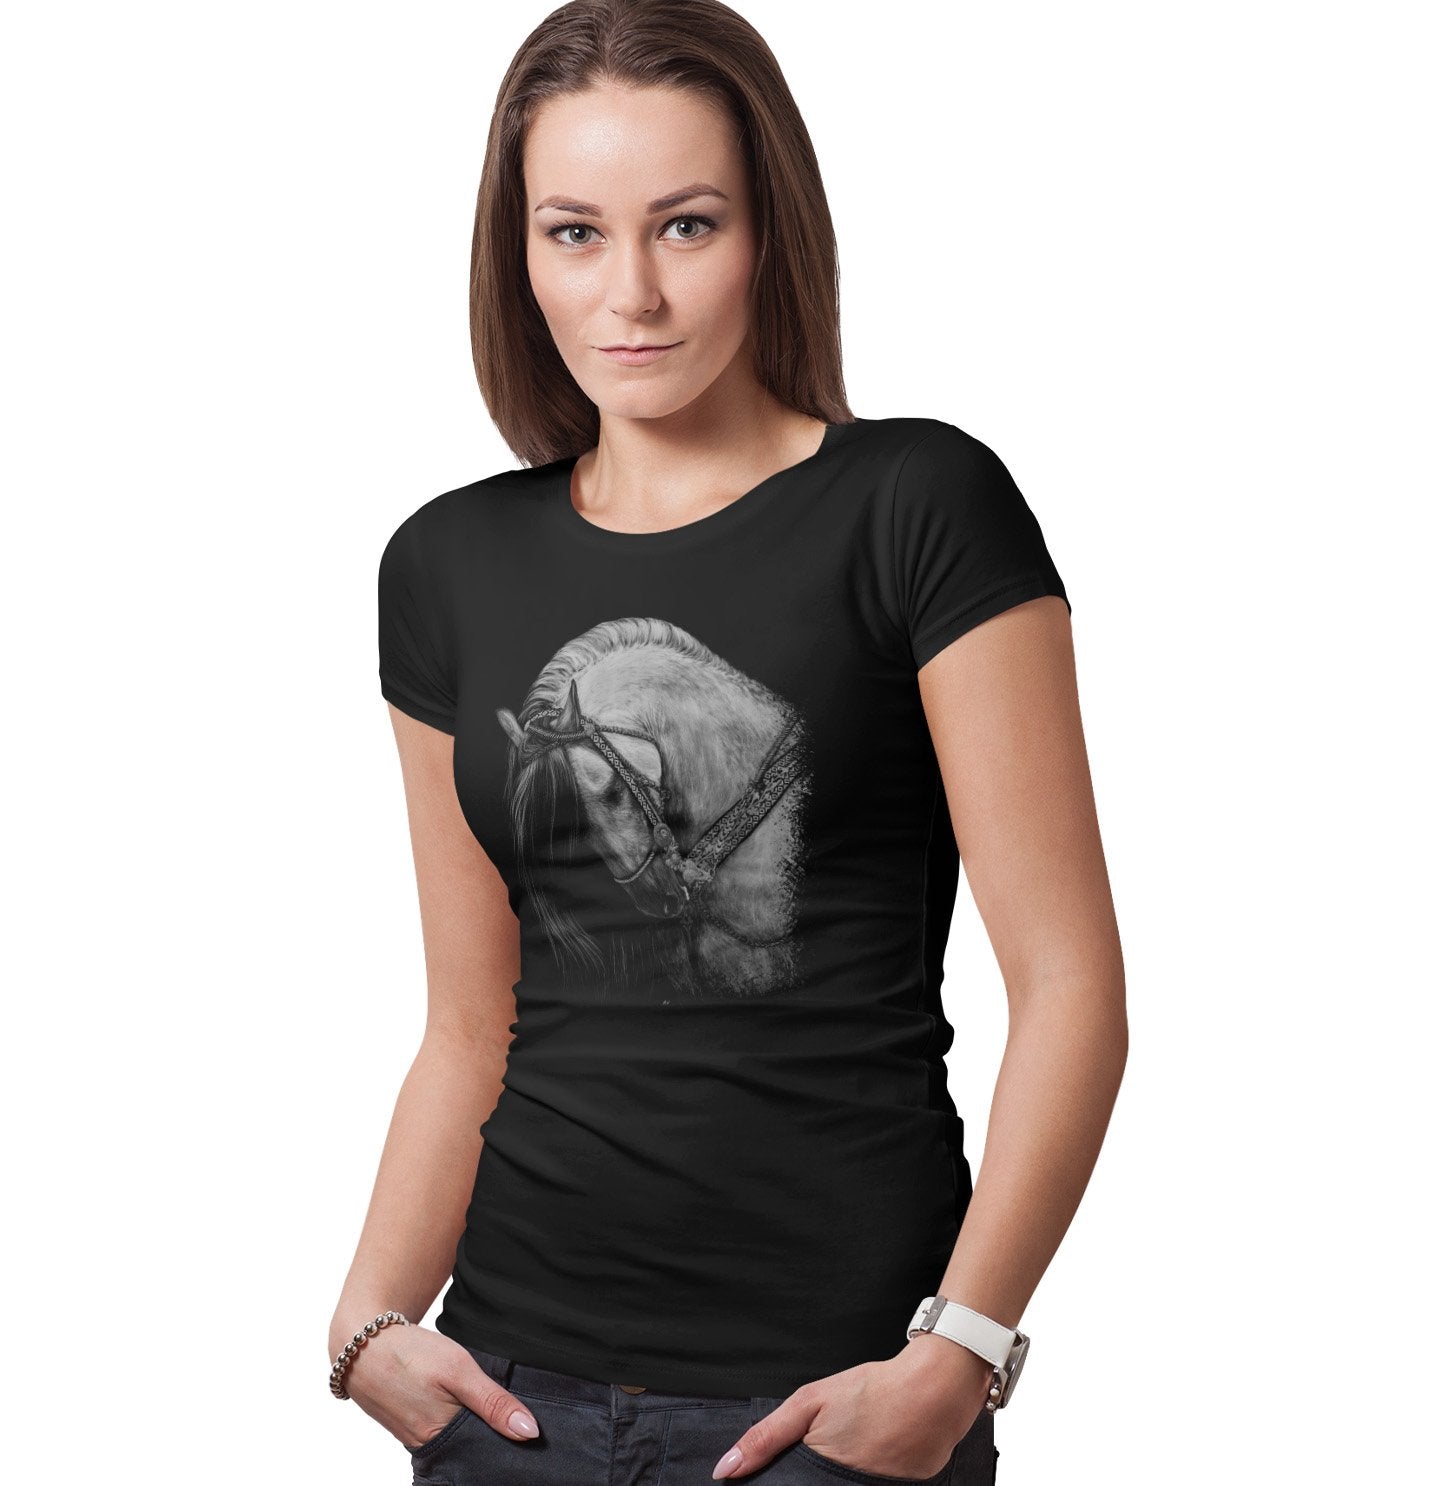 Horse on Black - Women's Fitted T-Shirt - Animal Tee